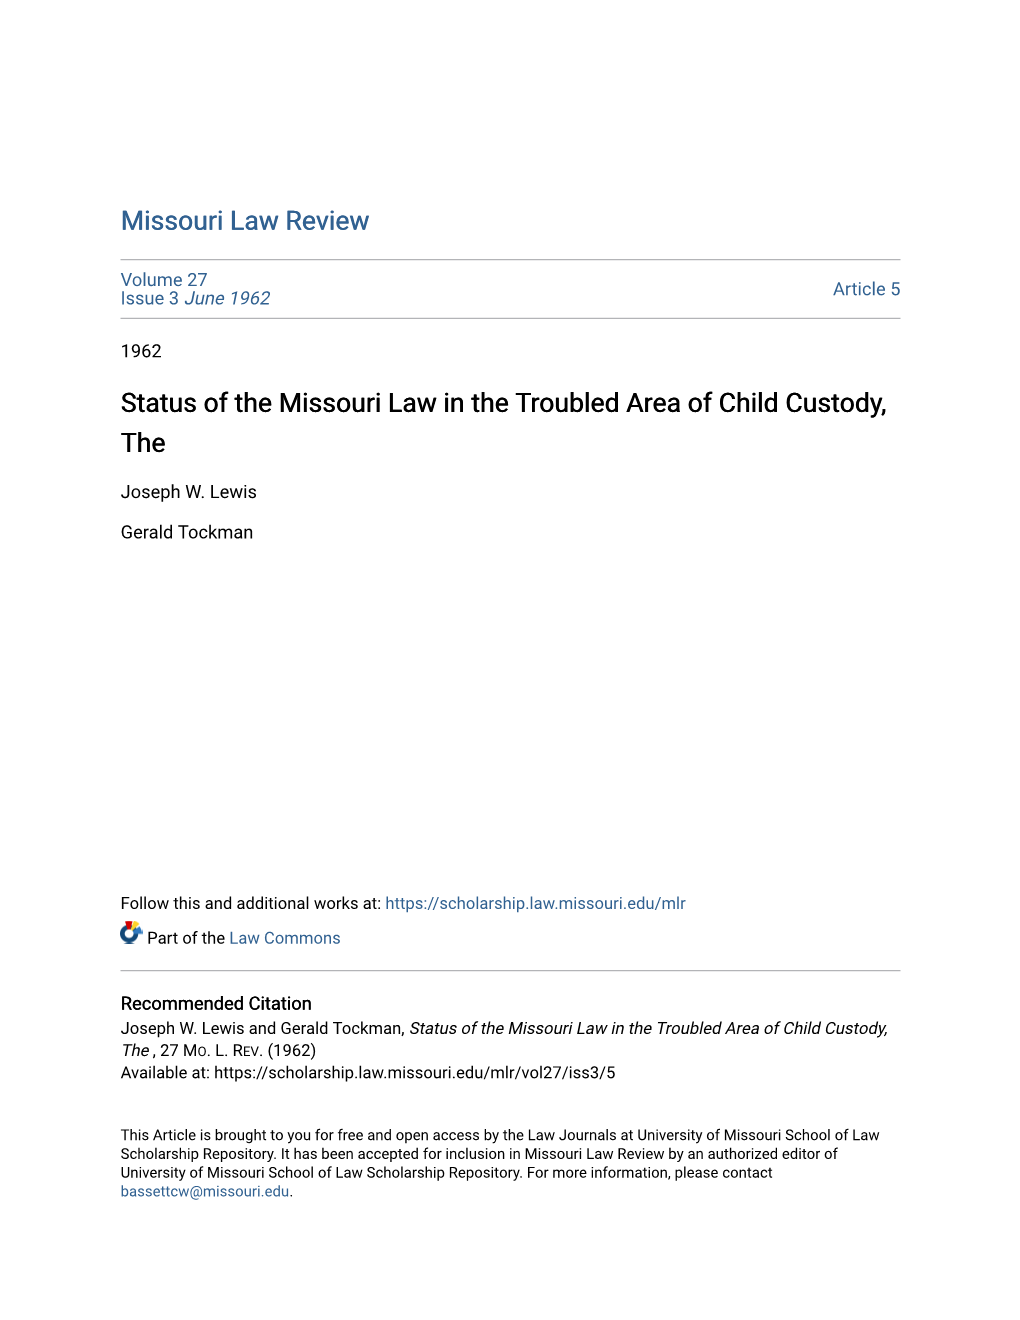 Status of the Missouri Law in the Troubled Area of Child Custody, The